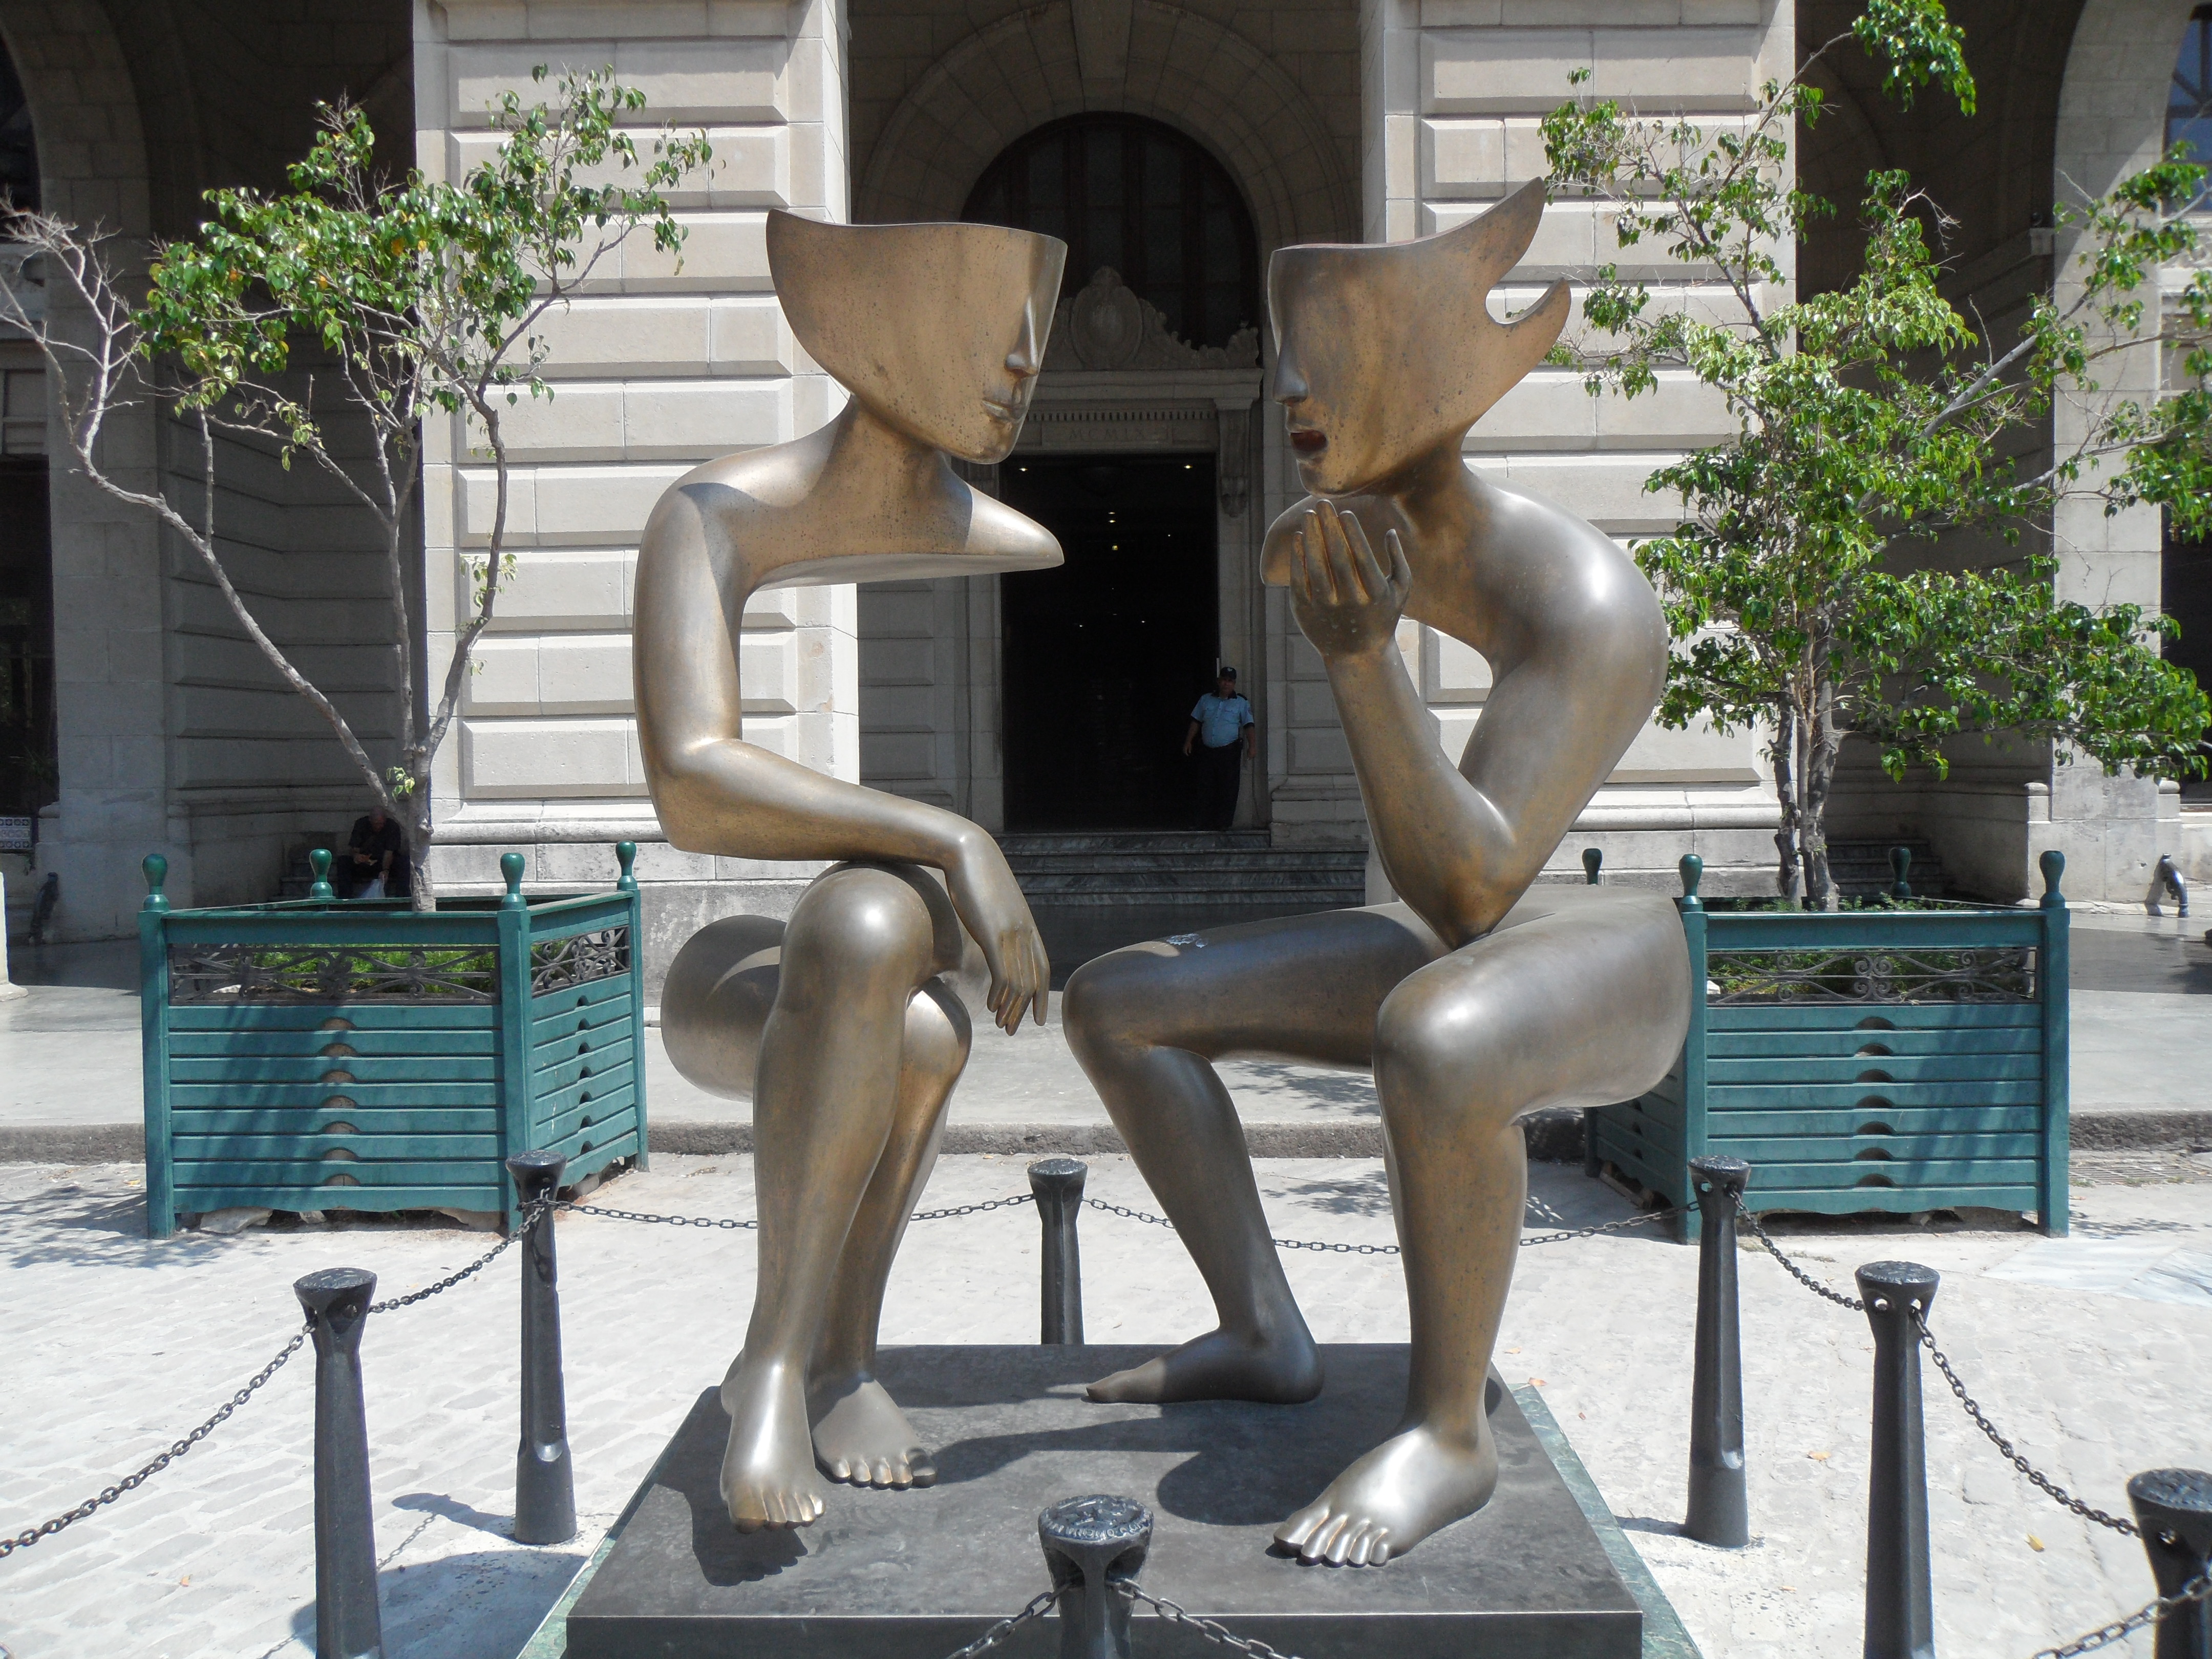 Abstract sculpture of two people sitting